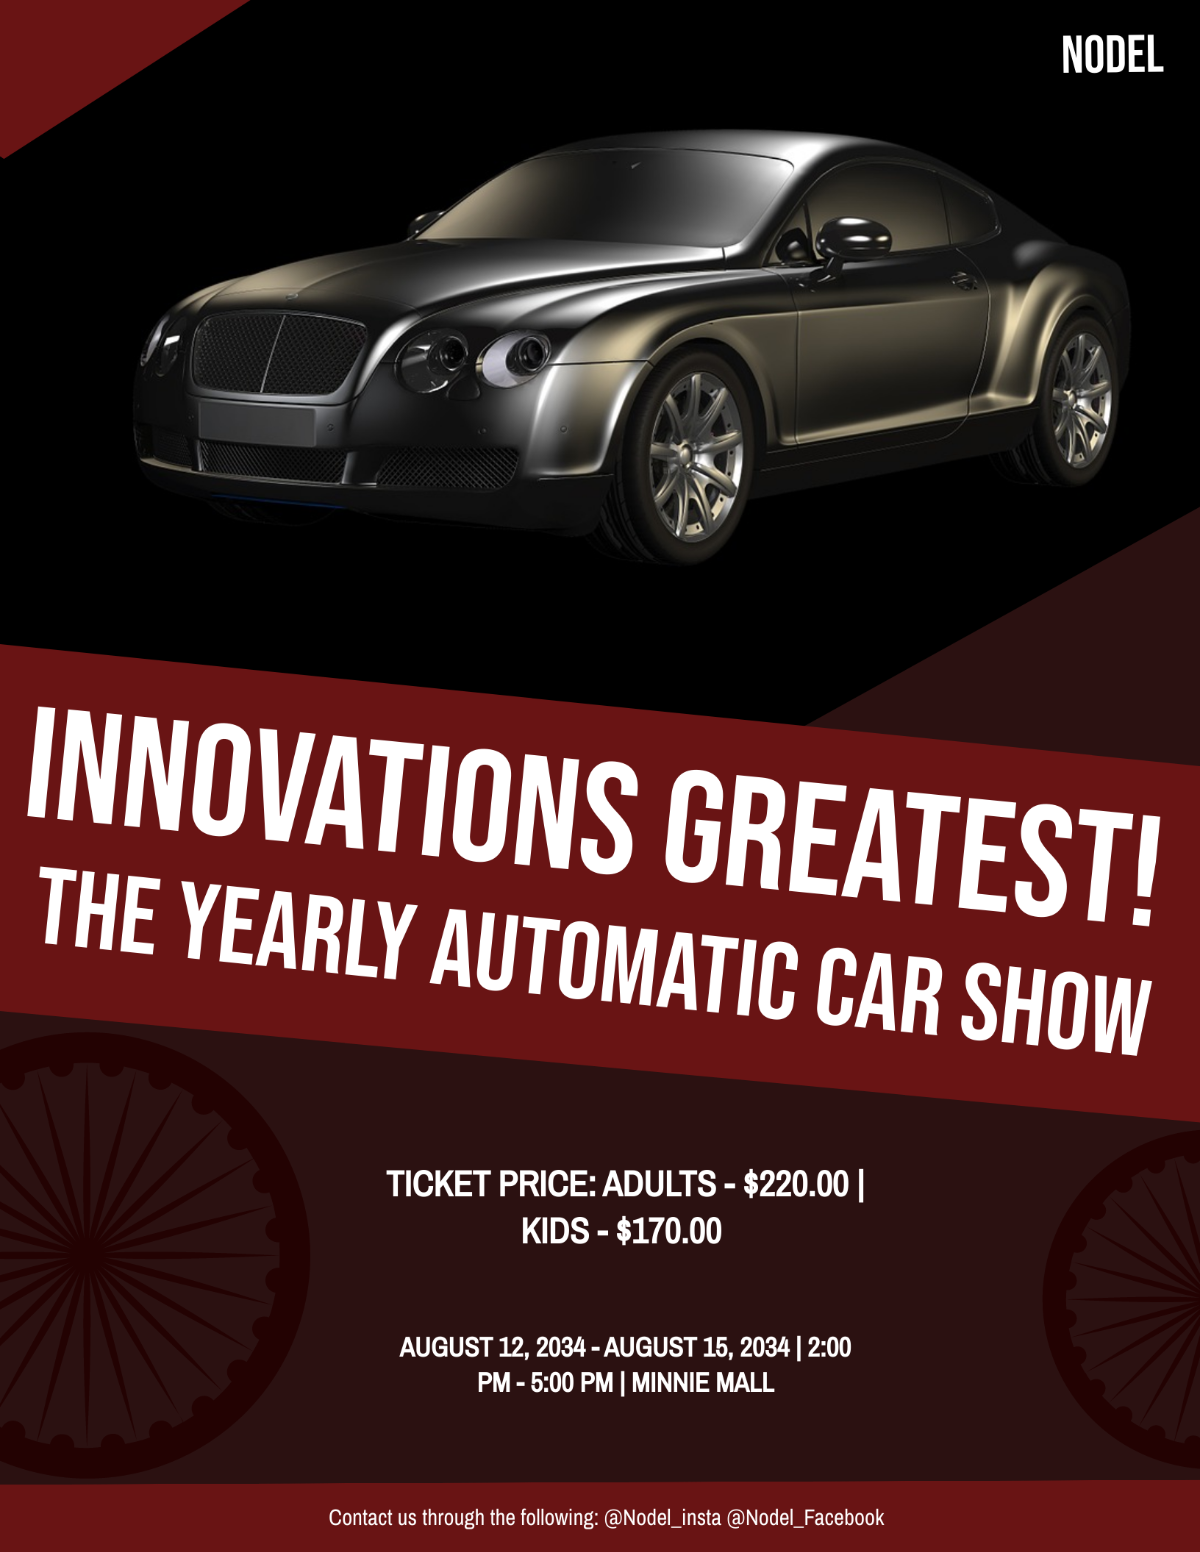 Auto Show Flyer Template